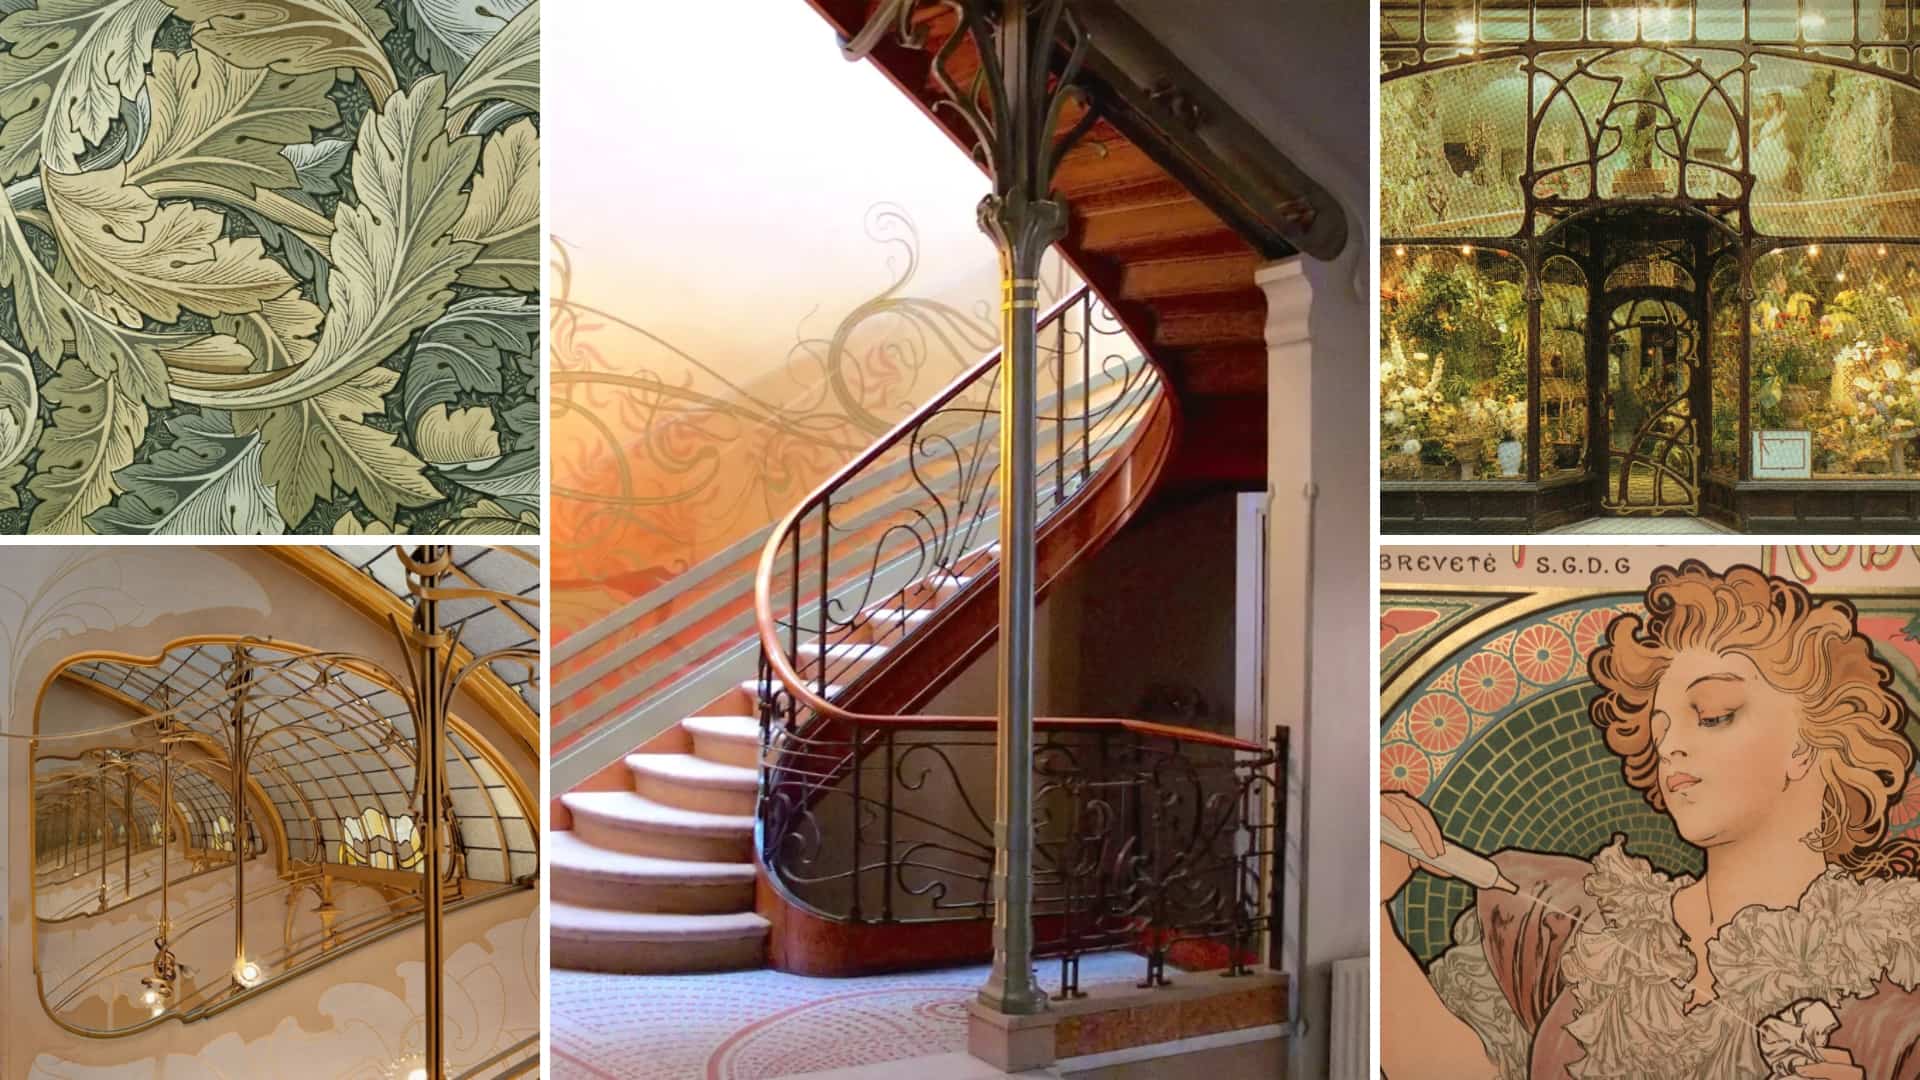 What style came after Art Nouveau?